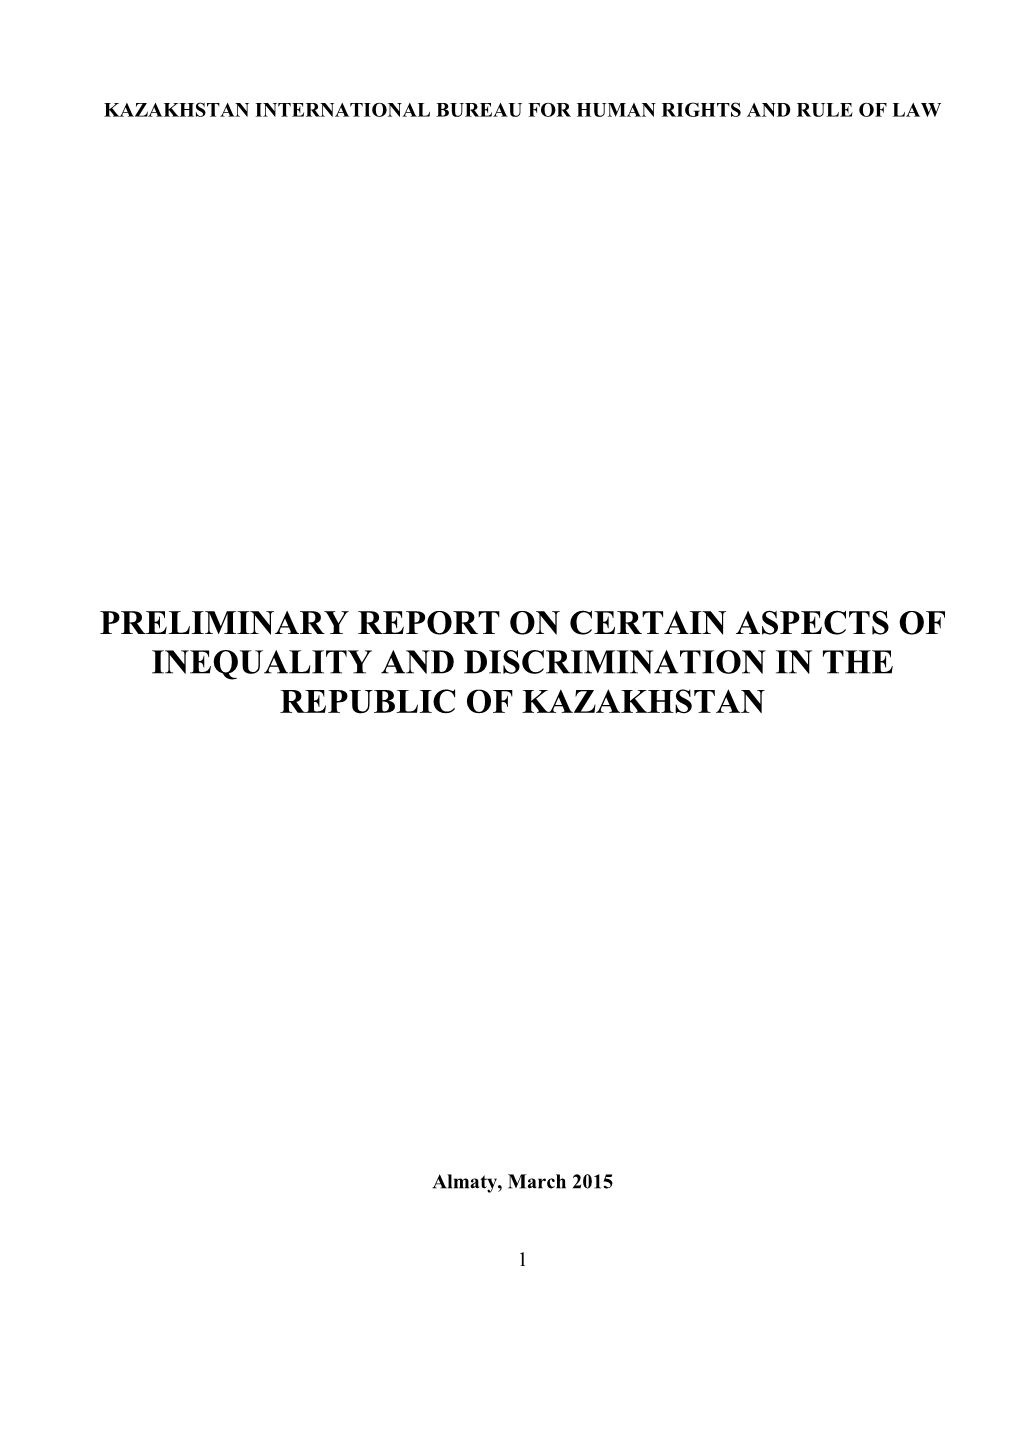 Preliminary Report on Certain Aspects of Inequality and Discrimination in the Republic of Kazakhstan